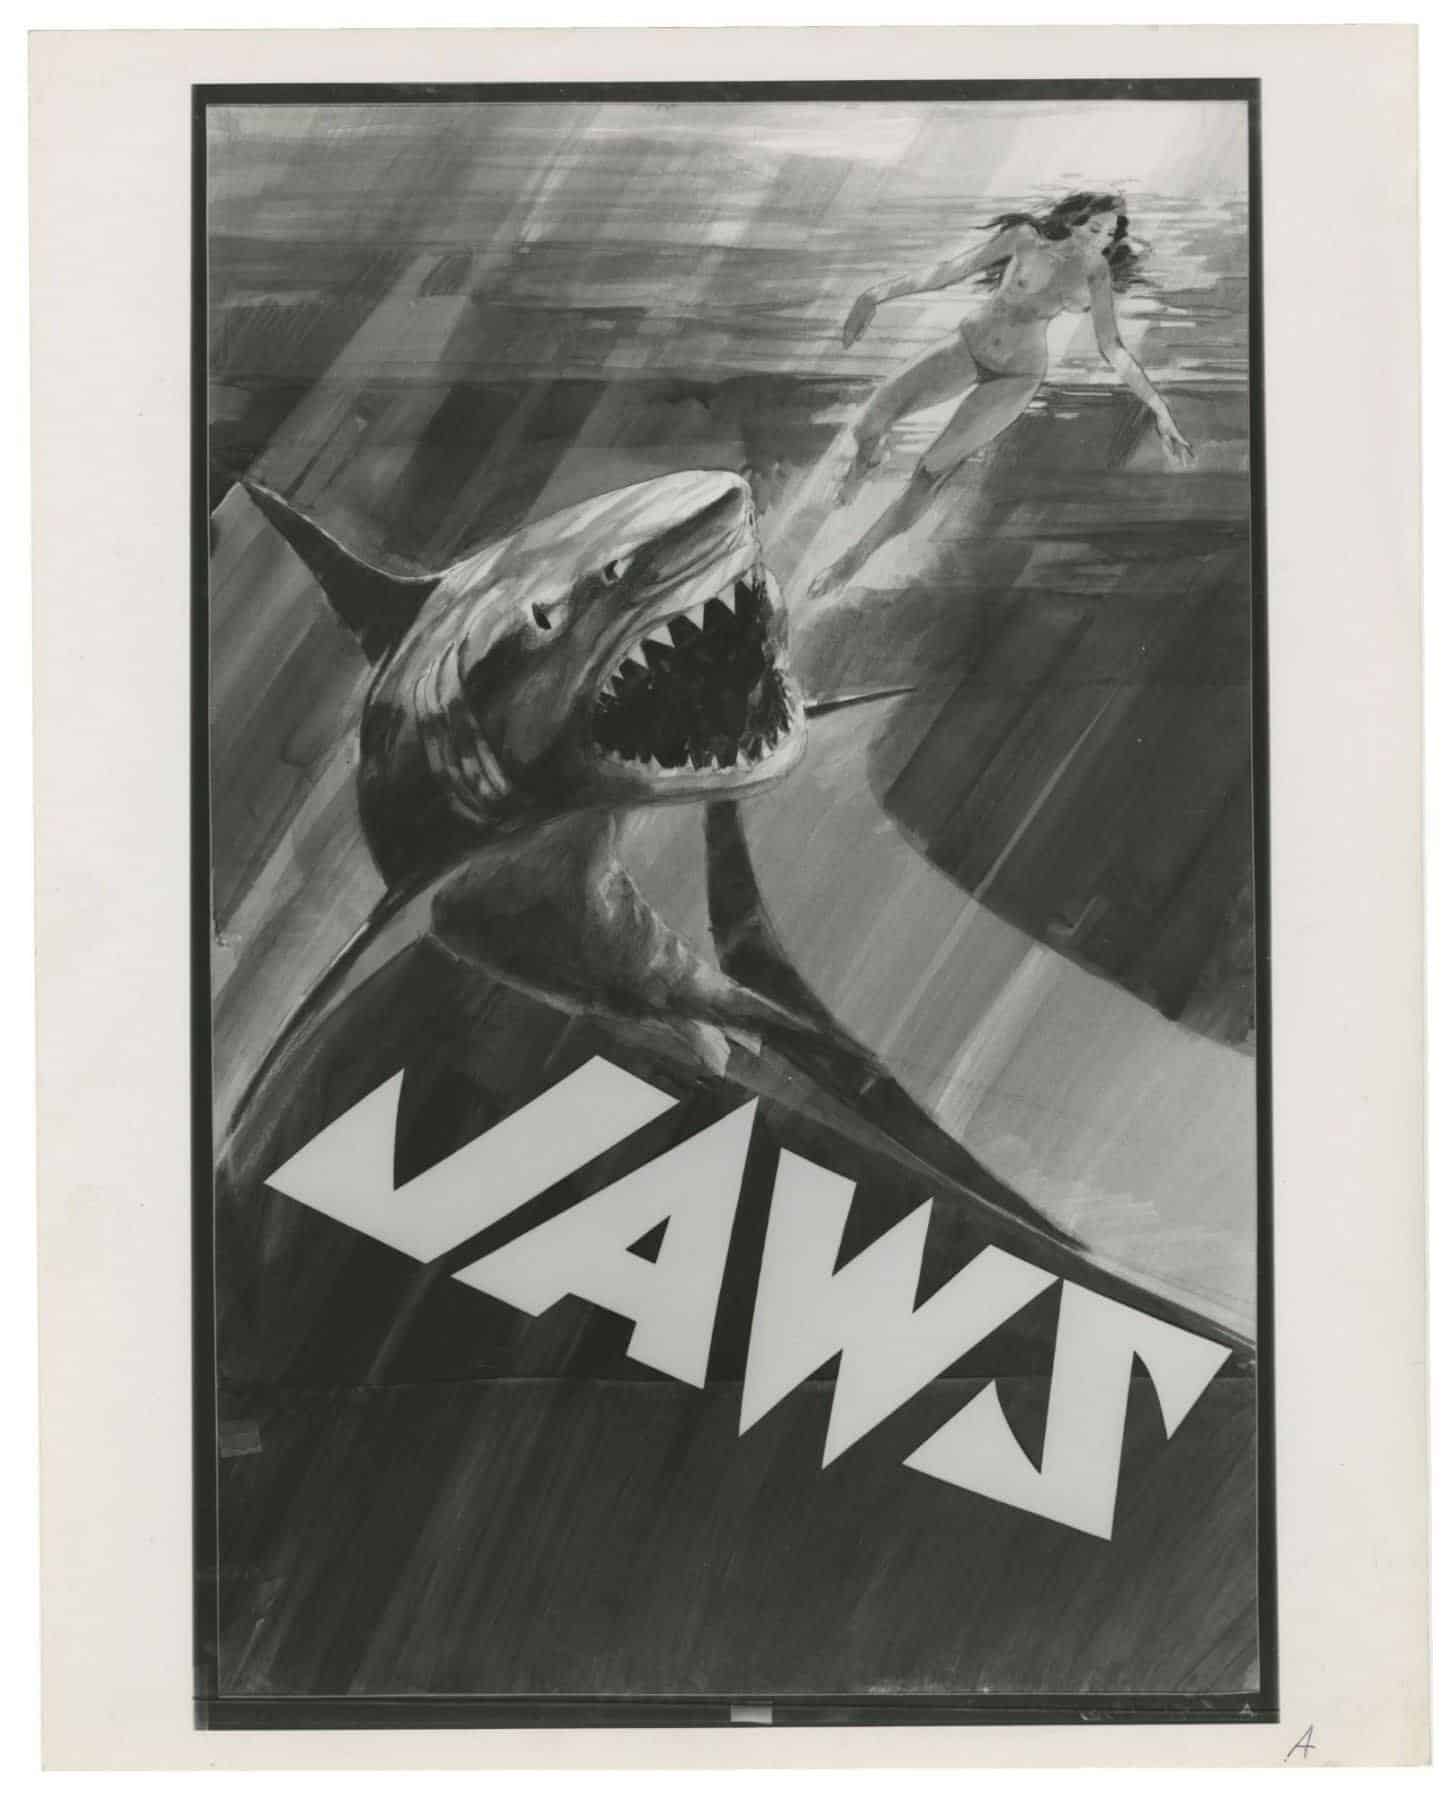 Jaws poster alterrnative concept